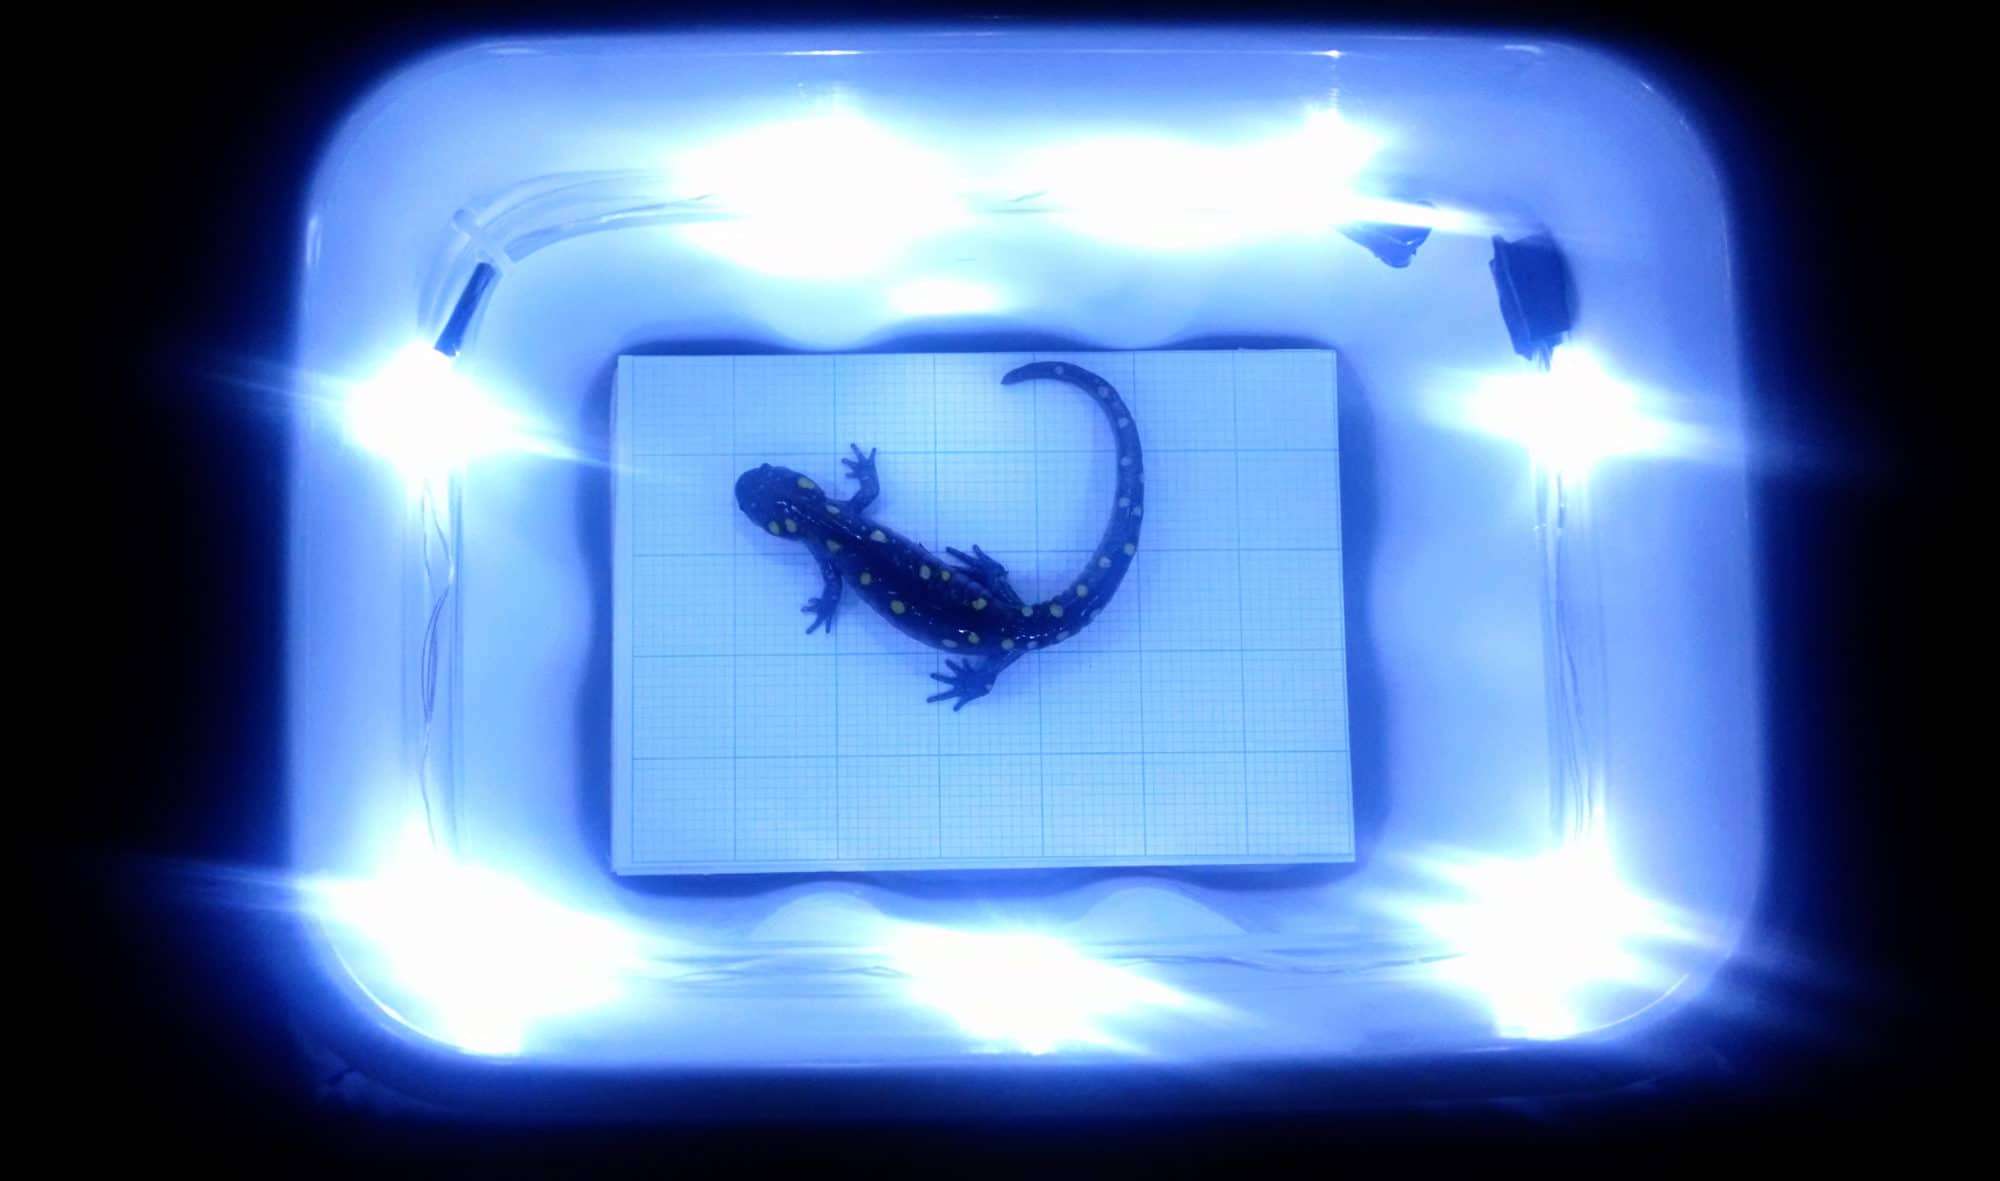 A spotted salamander sits in a lightbox, waiting to be photographed. (photo © Brett Amy Thelen)